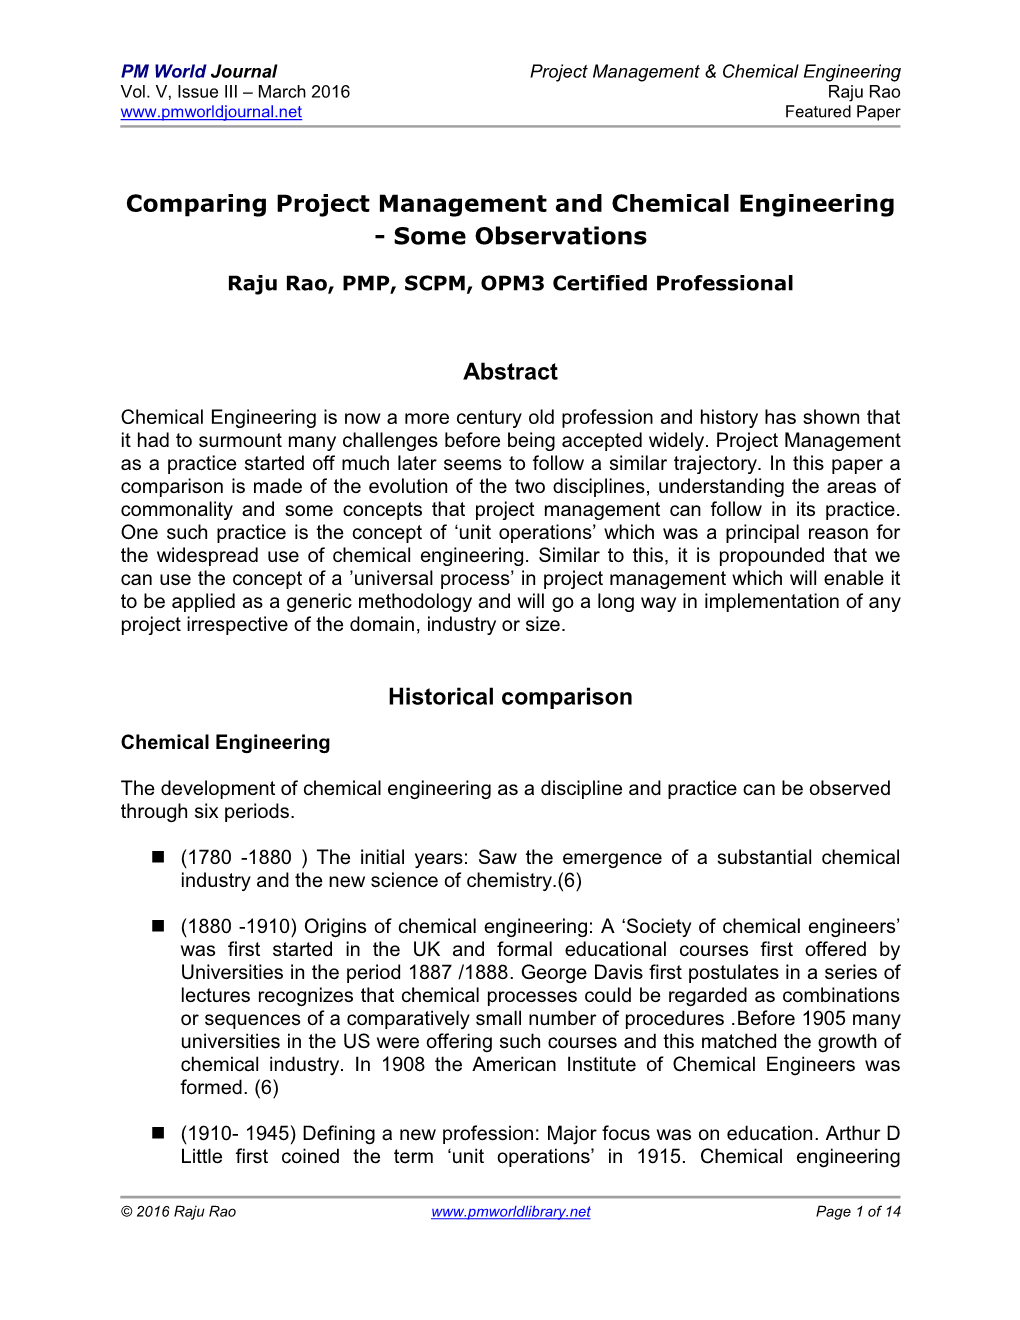 Comparing Project Management and Chemical Engineering - Some Observations